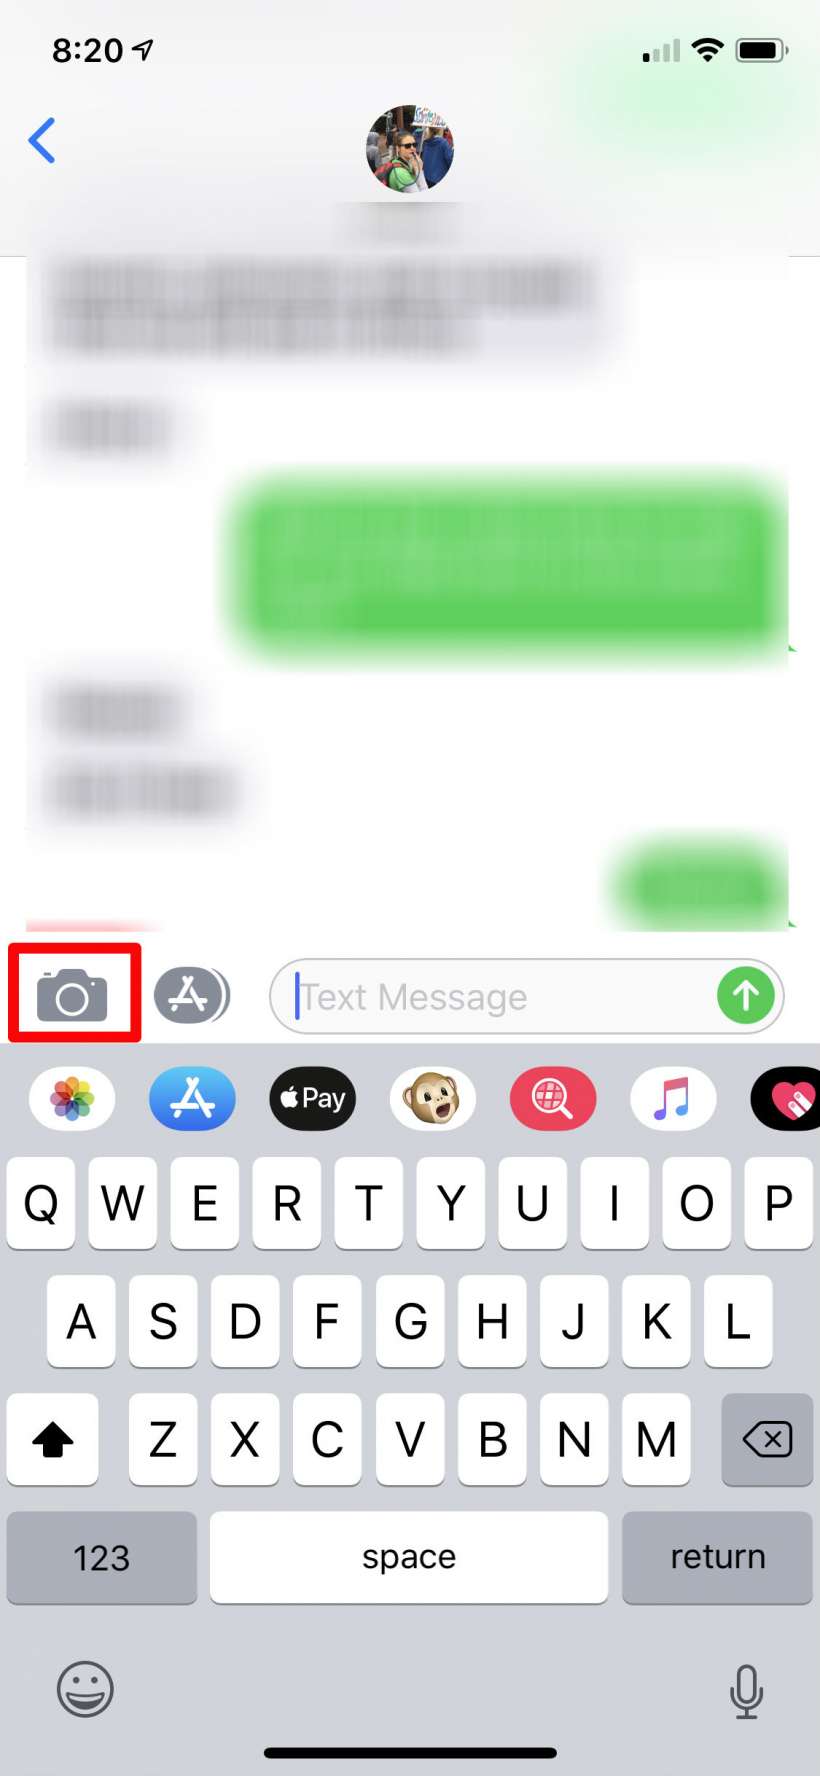 How to use stickers, filters, Animoji and Memoji in Messages for iPhone and iPad.